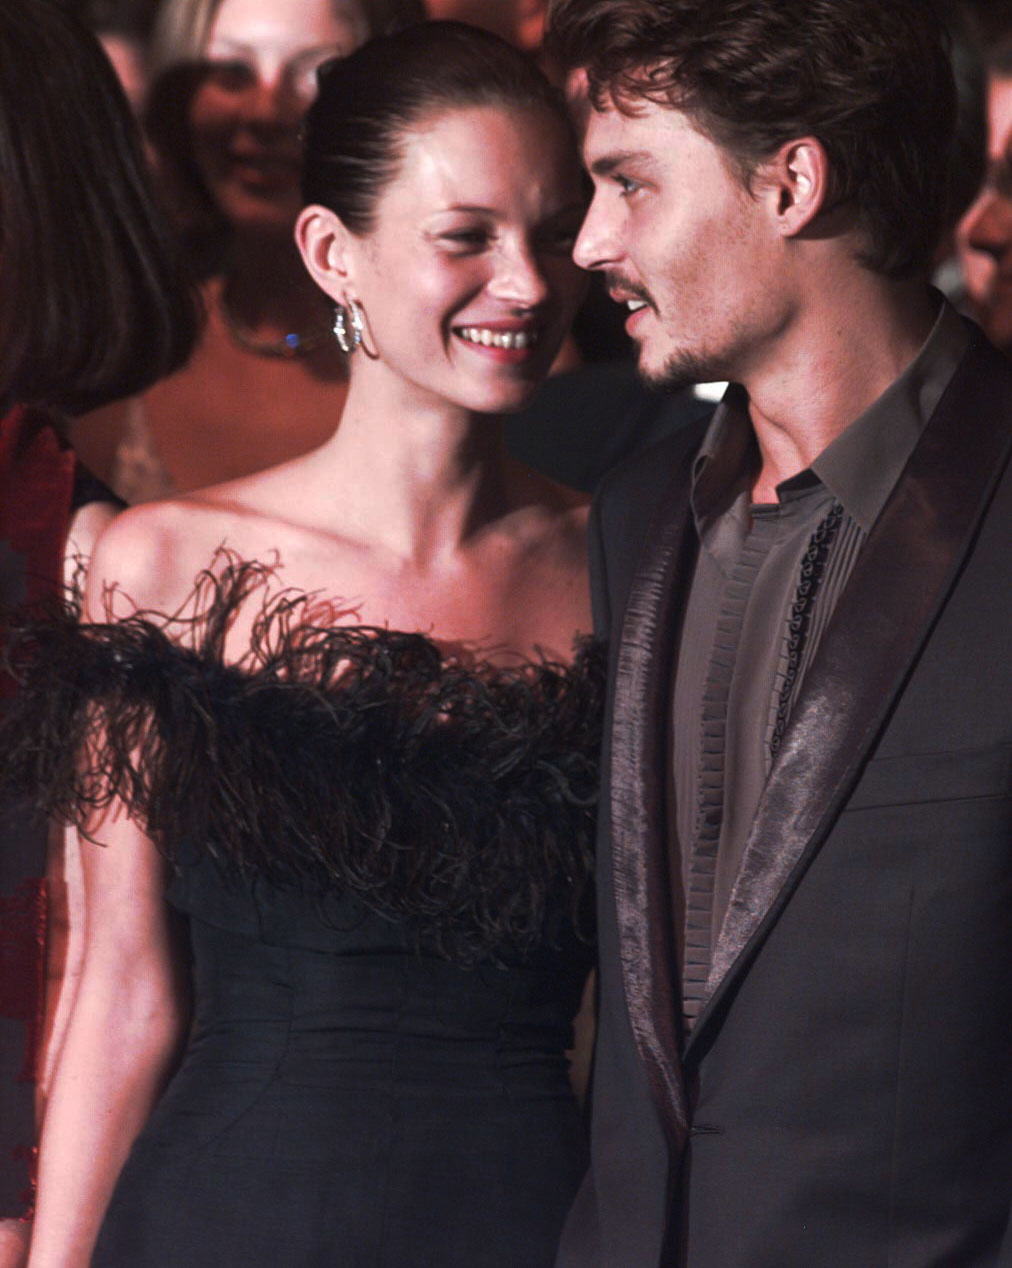 Kate Moss and Johnny Depp at the premiere of "Fear And Loathing In Las Vegas" during the during the 51st Cannes Film Festival in Cannes, France on May 15, 1998 | Source: Getty Images